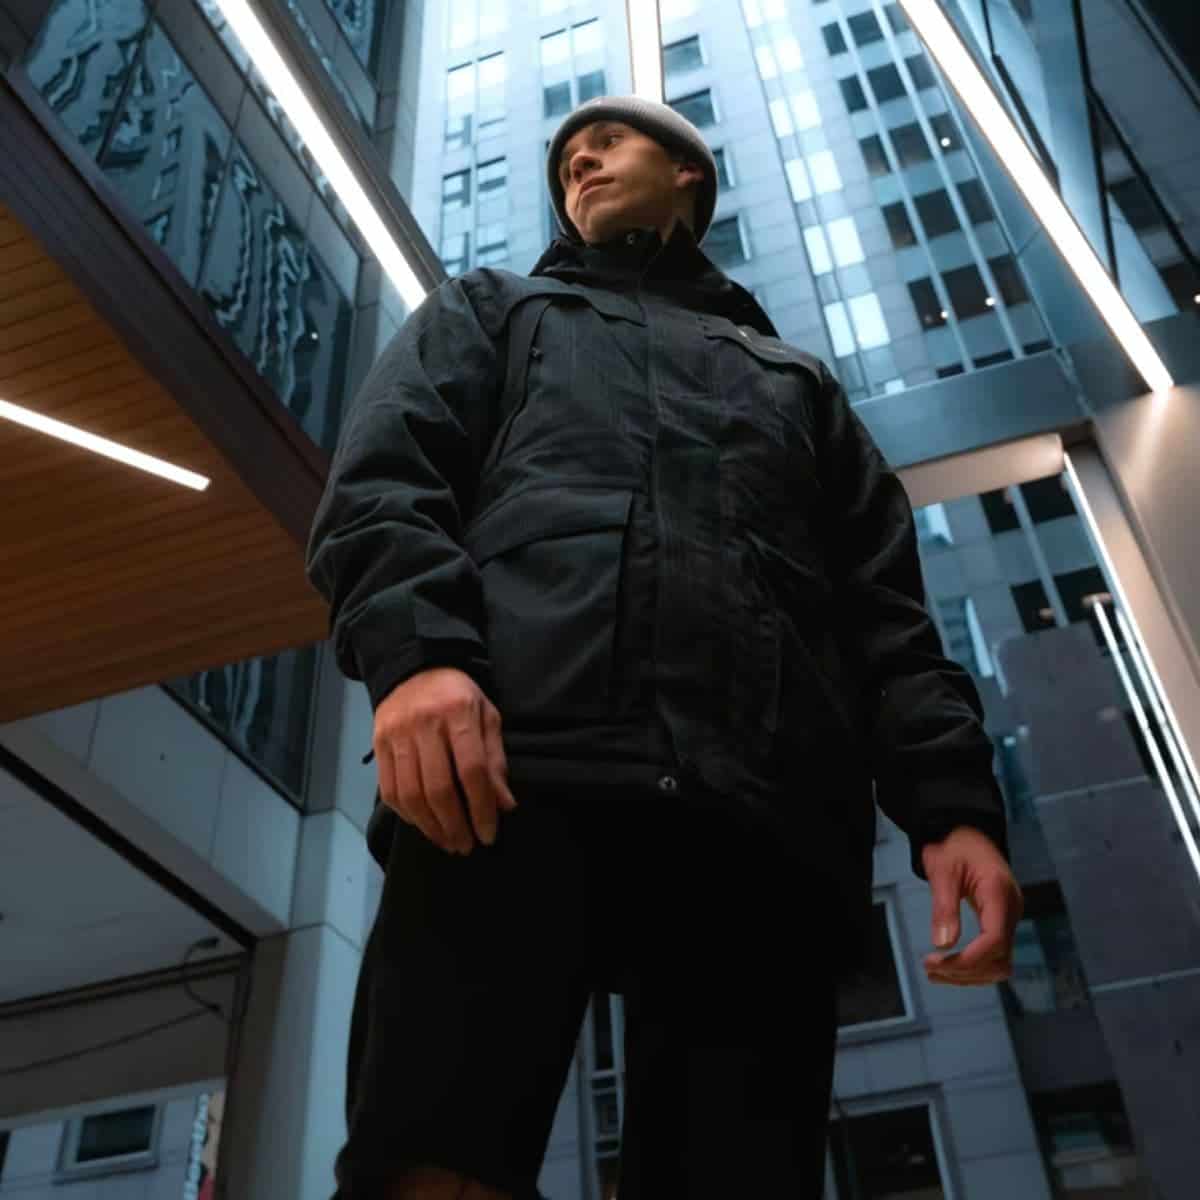 Low-angle shot of a person surrounded by tall buildings.